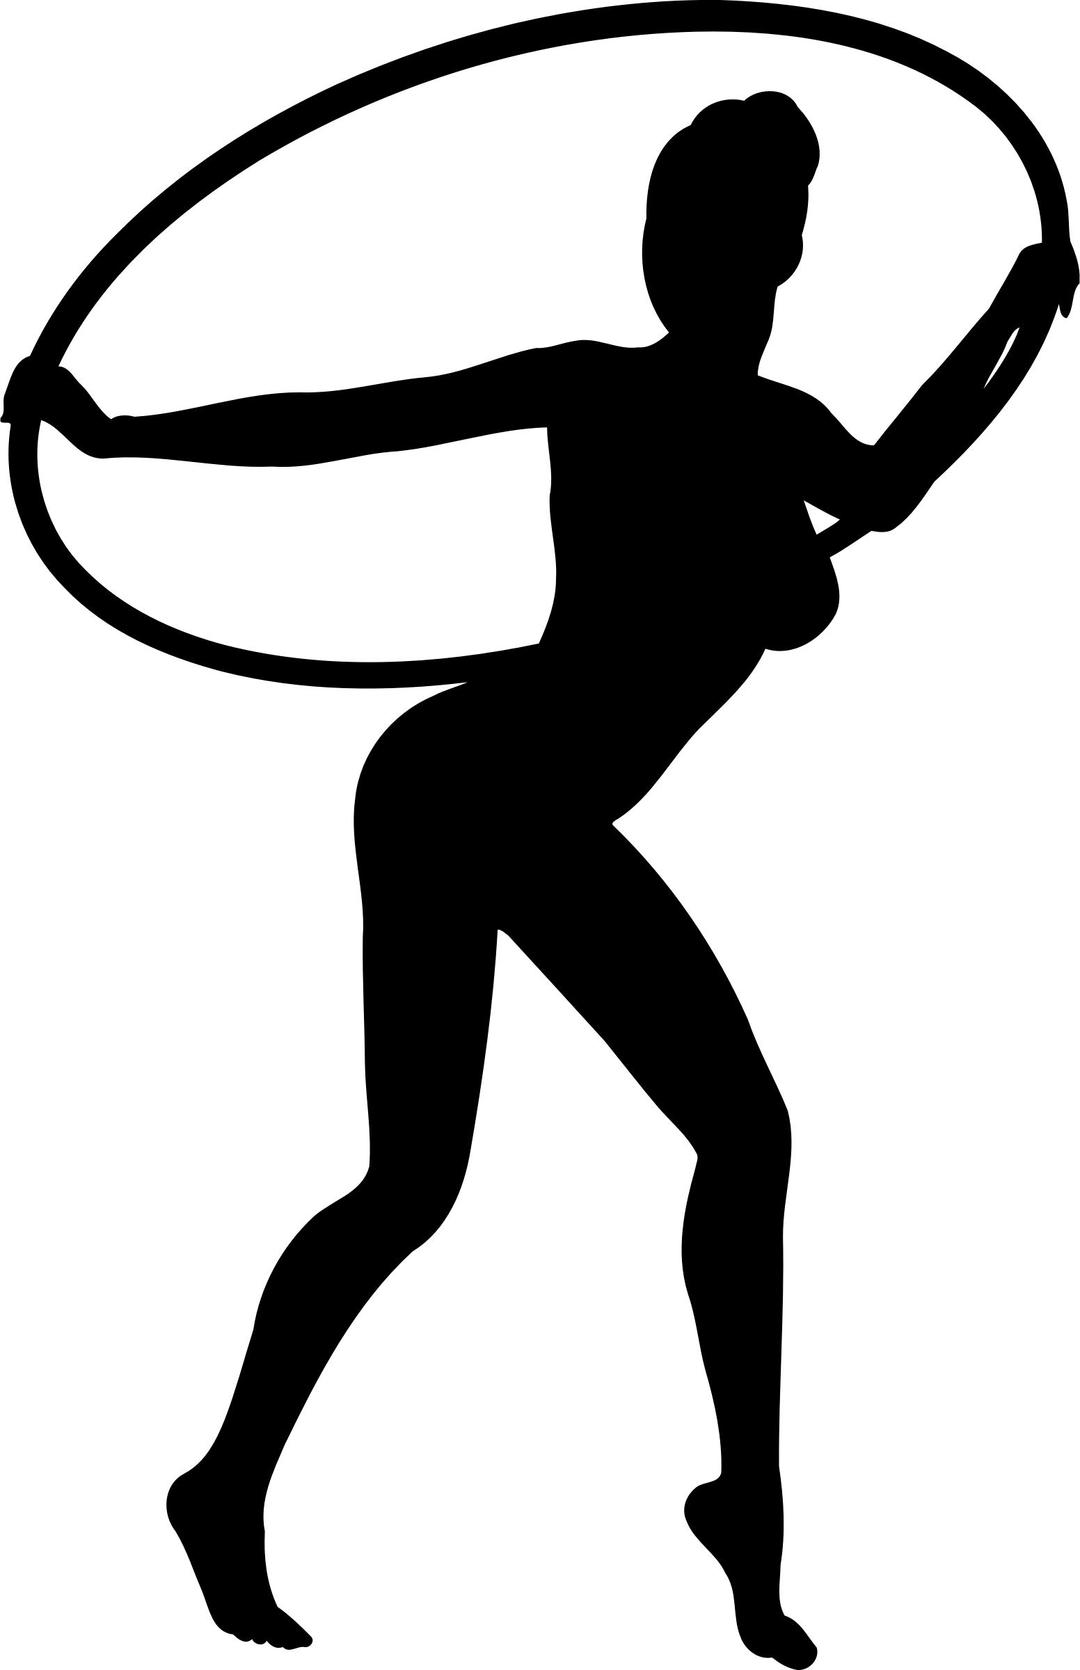 Girl dancing with hoop silhouette png transparent